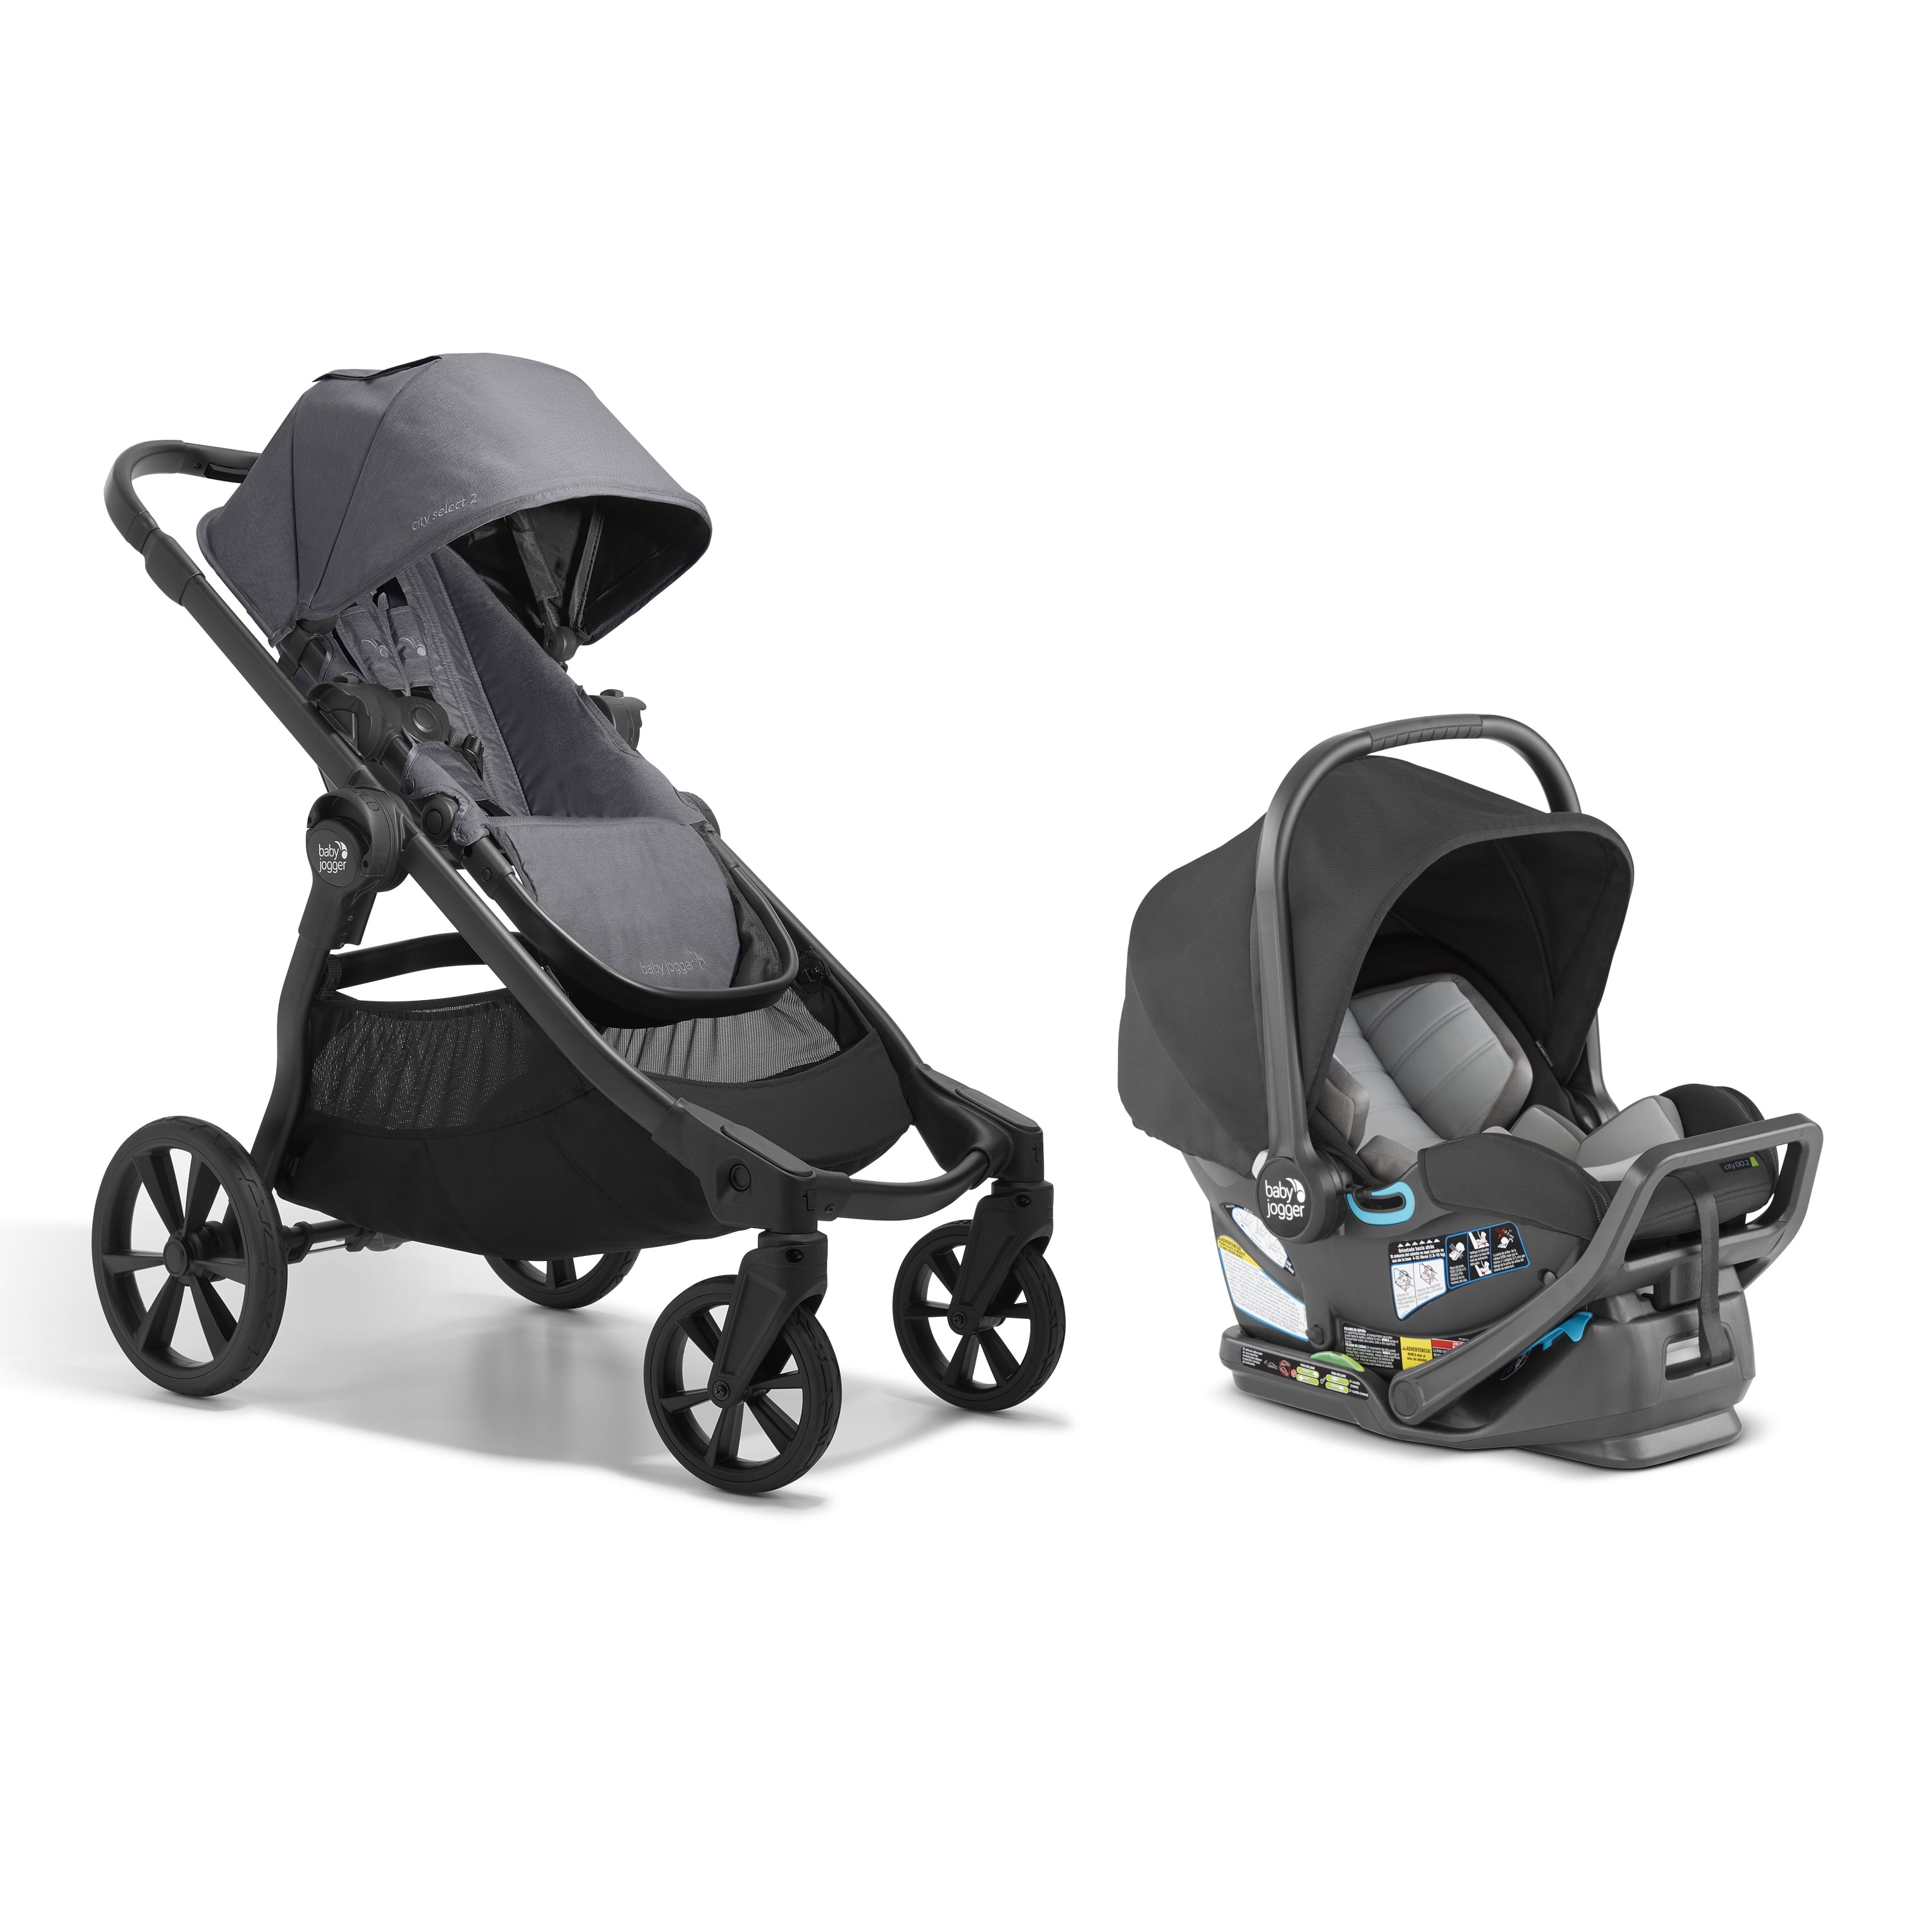 City Select® 2 Single-to-Double Modular Travel System, Radiant - Walmart.com